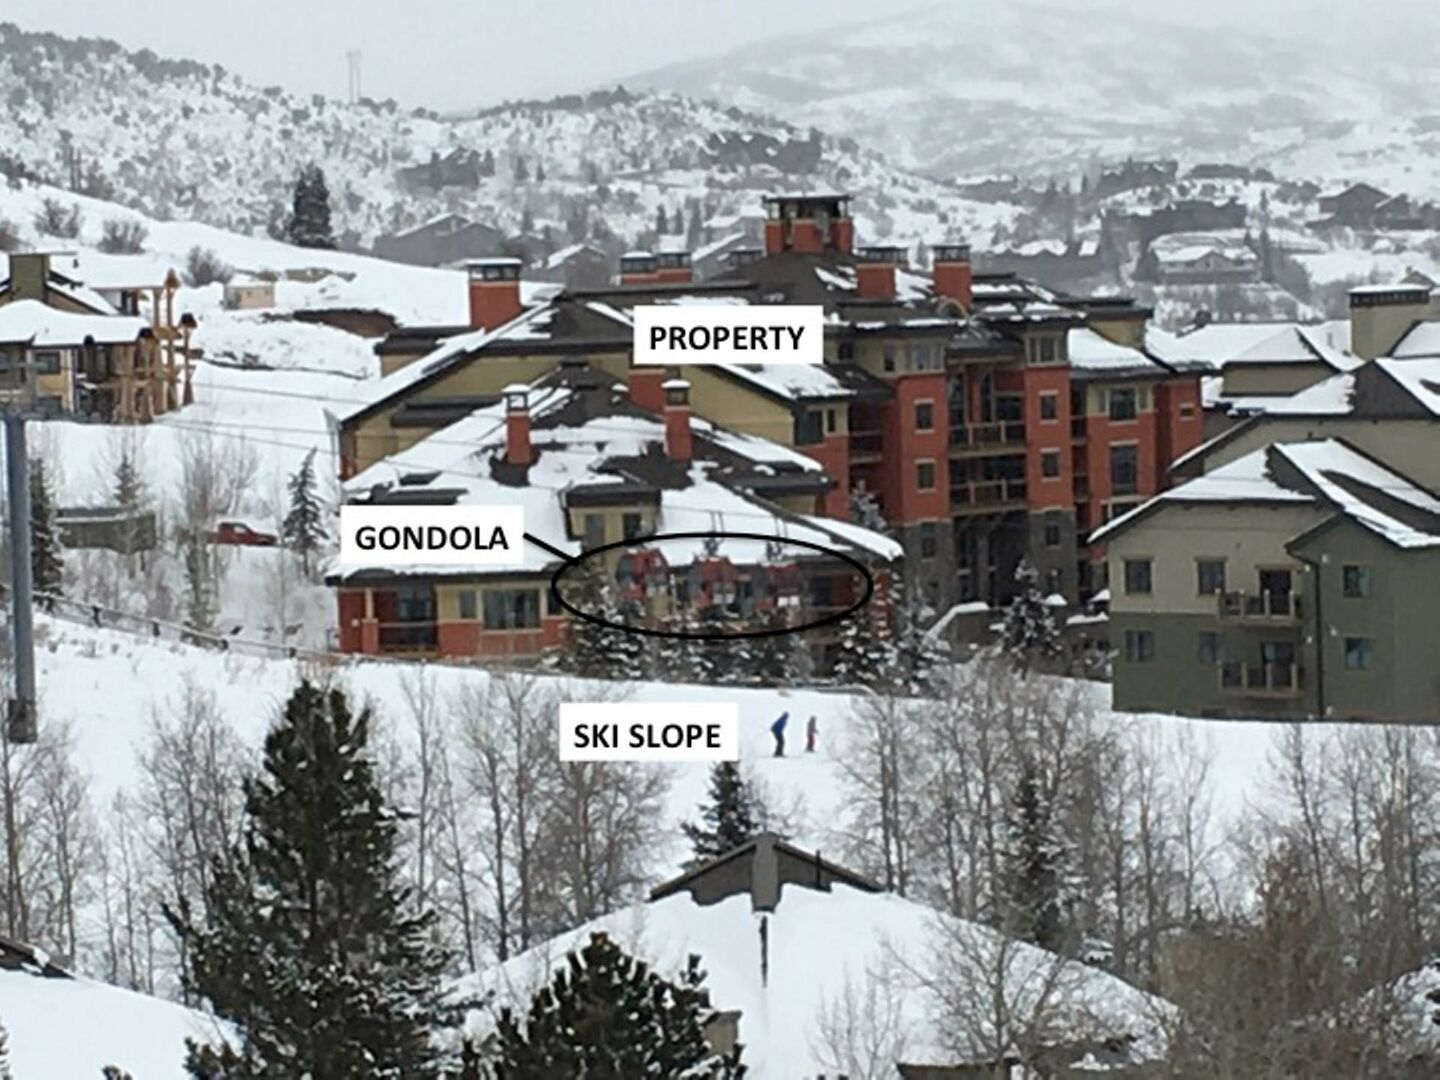 Property location in relation to gondola and ski slope